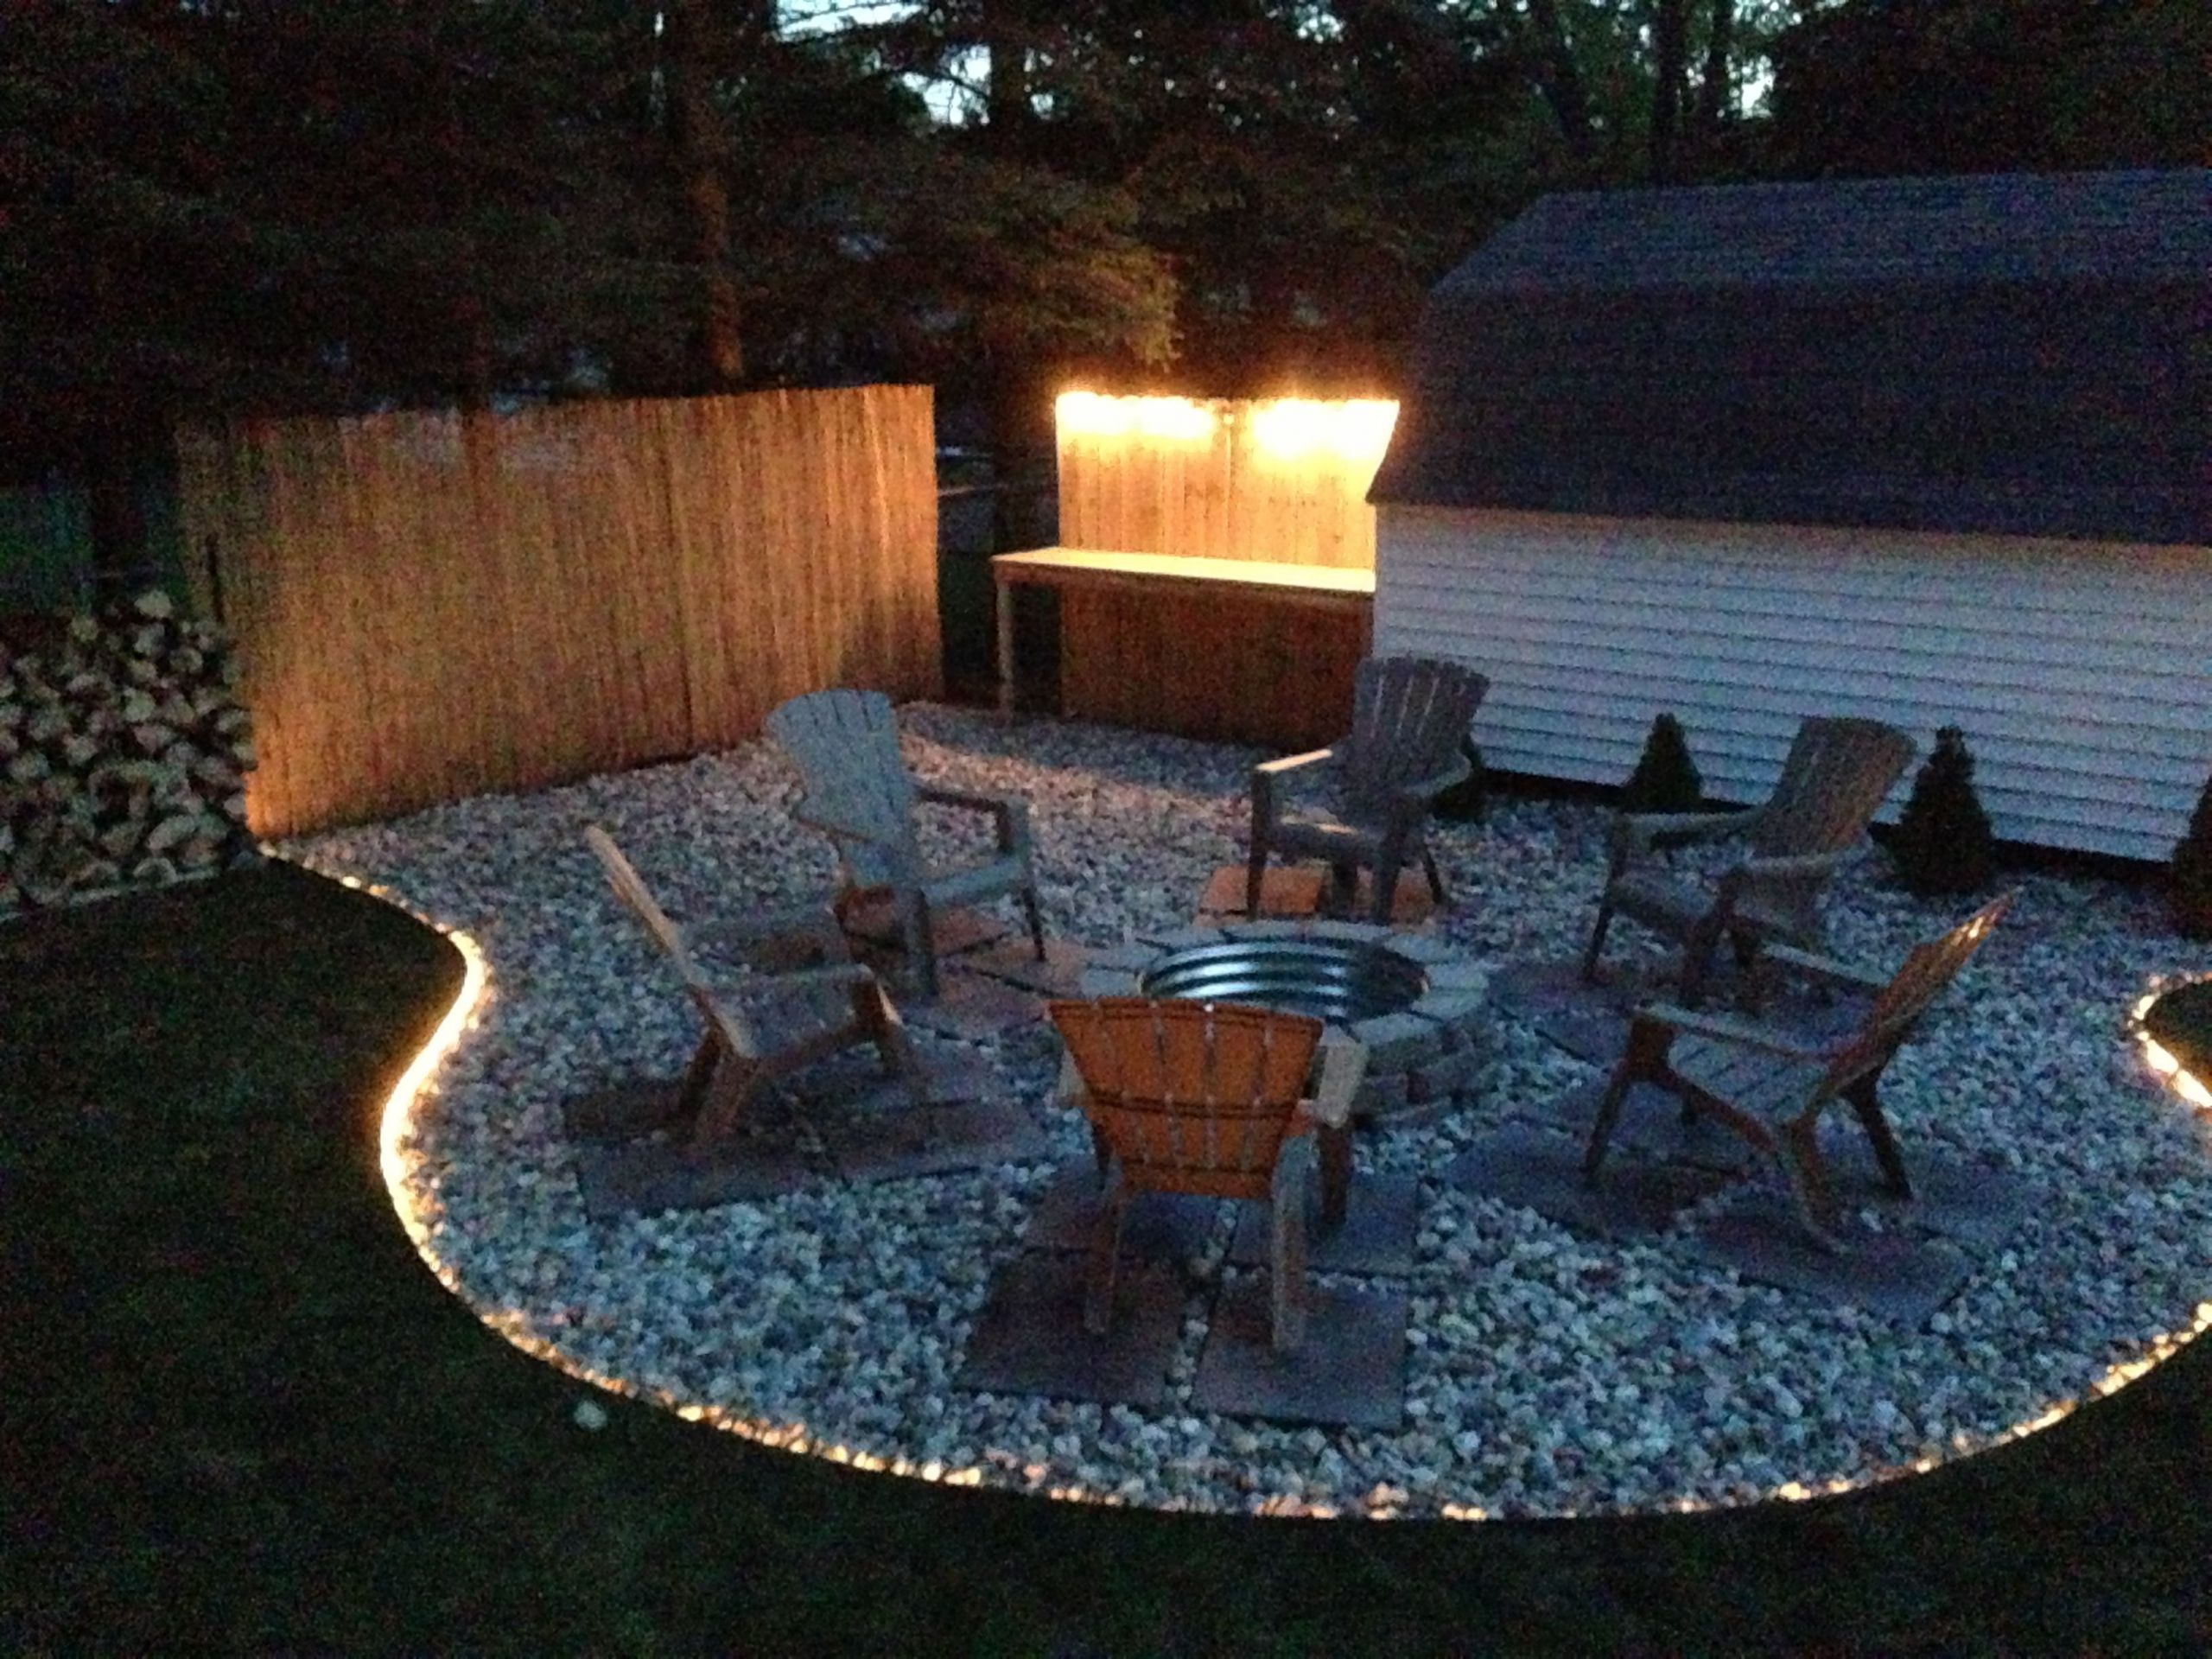 Backyard Design With Fire Pit
 Ideas For Fire Pits In Backyard Ztil News